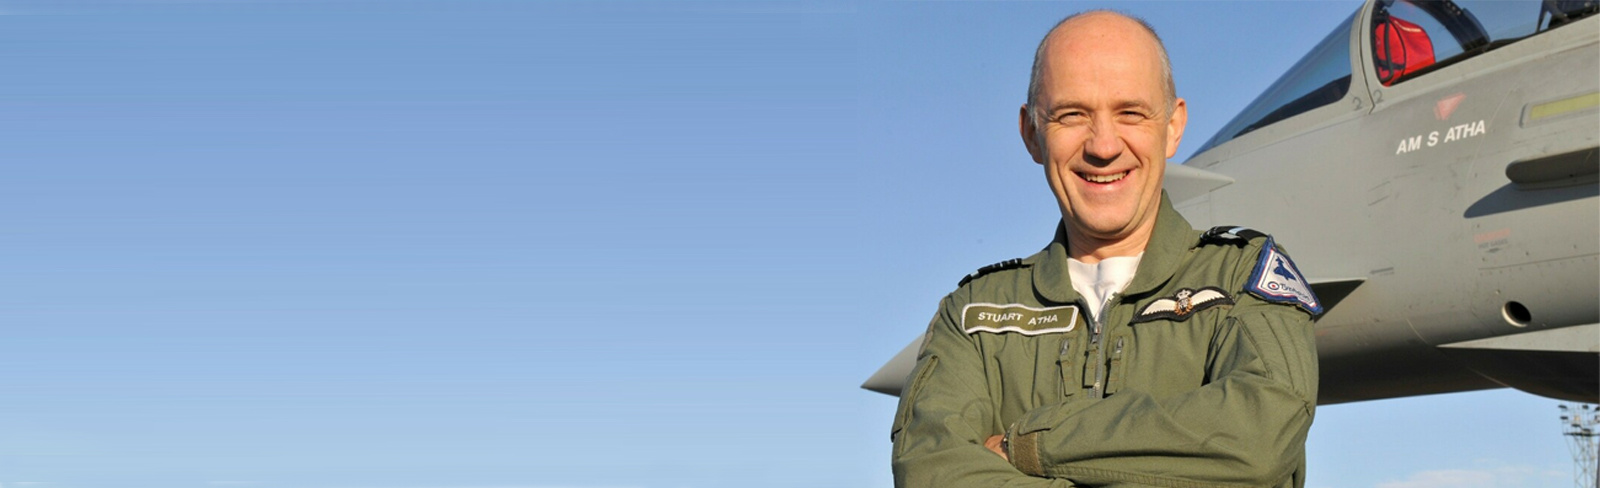 Sir Stuart Atha, Director of Training Strategy, stands next to a Eurofighter Typhoon jet with his arms folded, smiling at the camera.